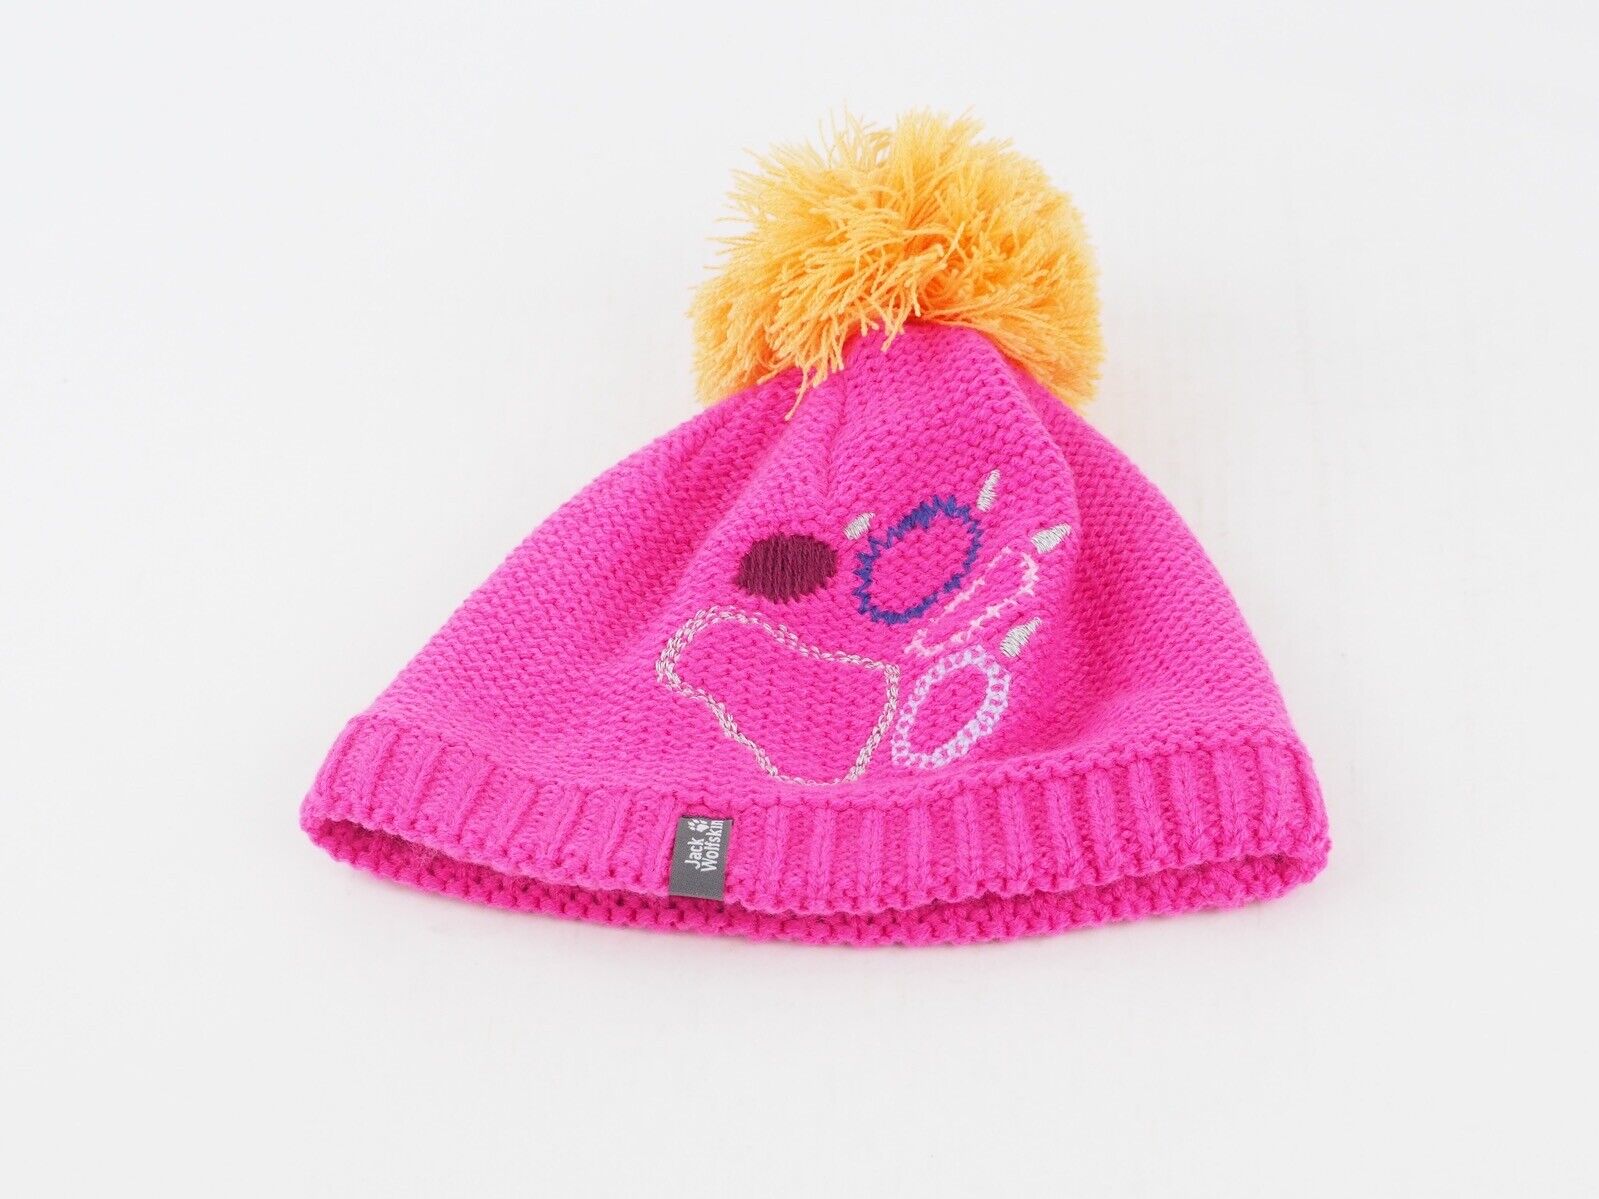 Girls Jack Wolfskin Paw Print Knit Cap Pink Warm Winter Hat With A Pom –  London Top Style